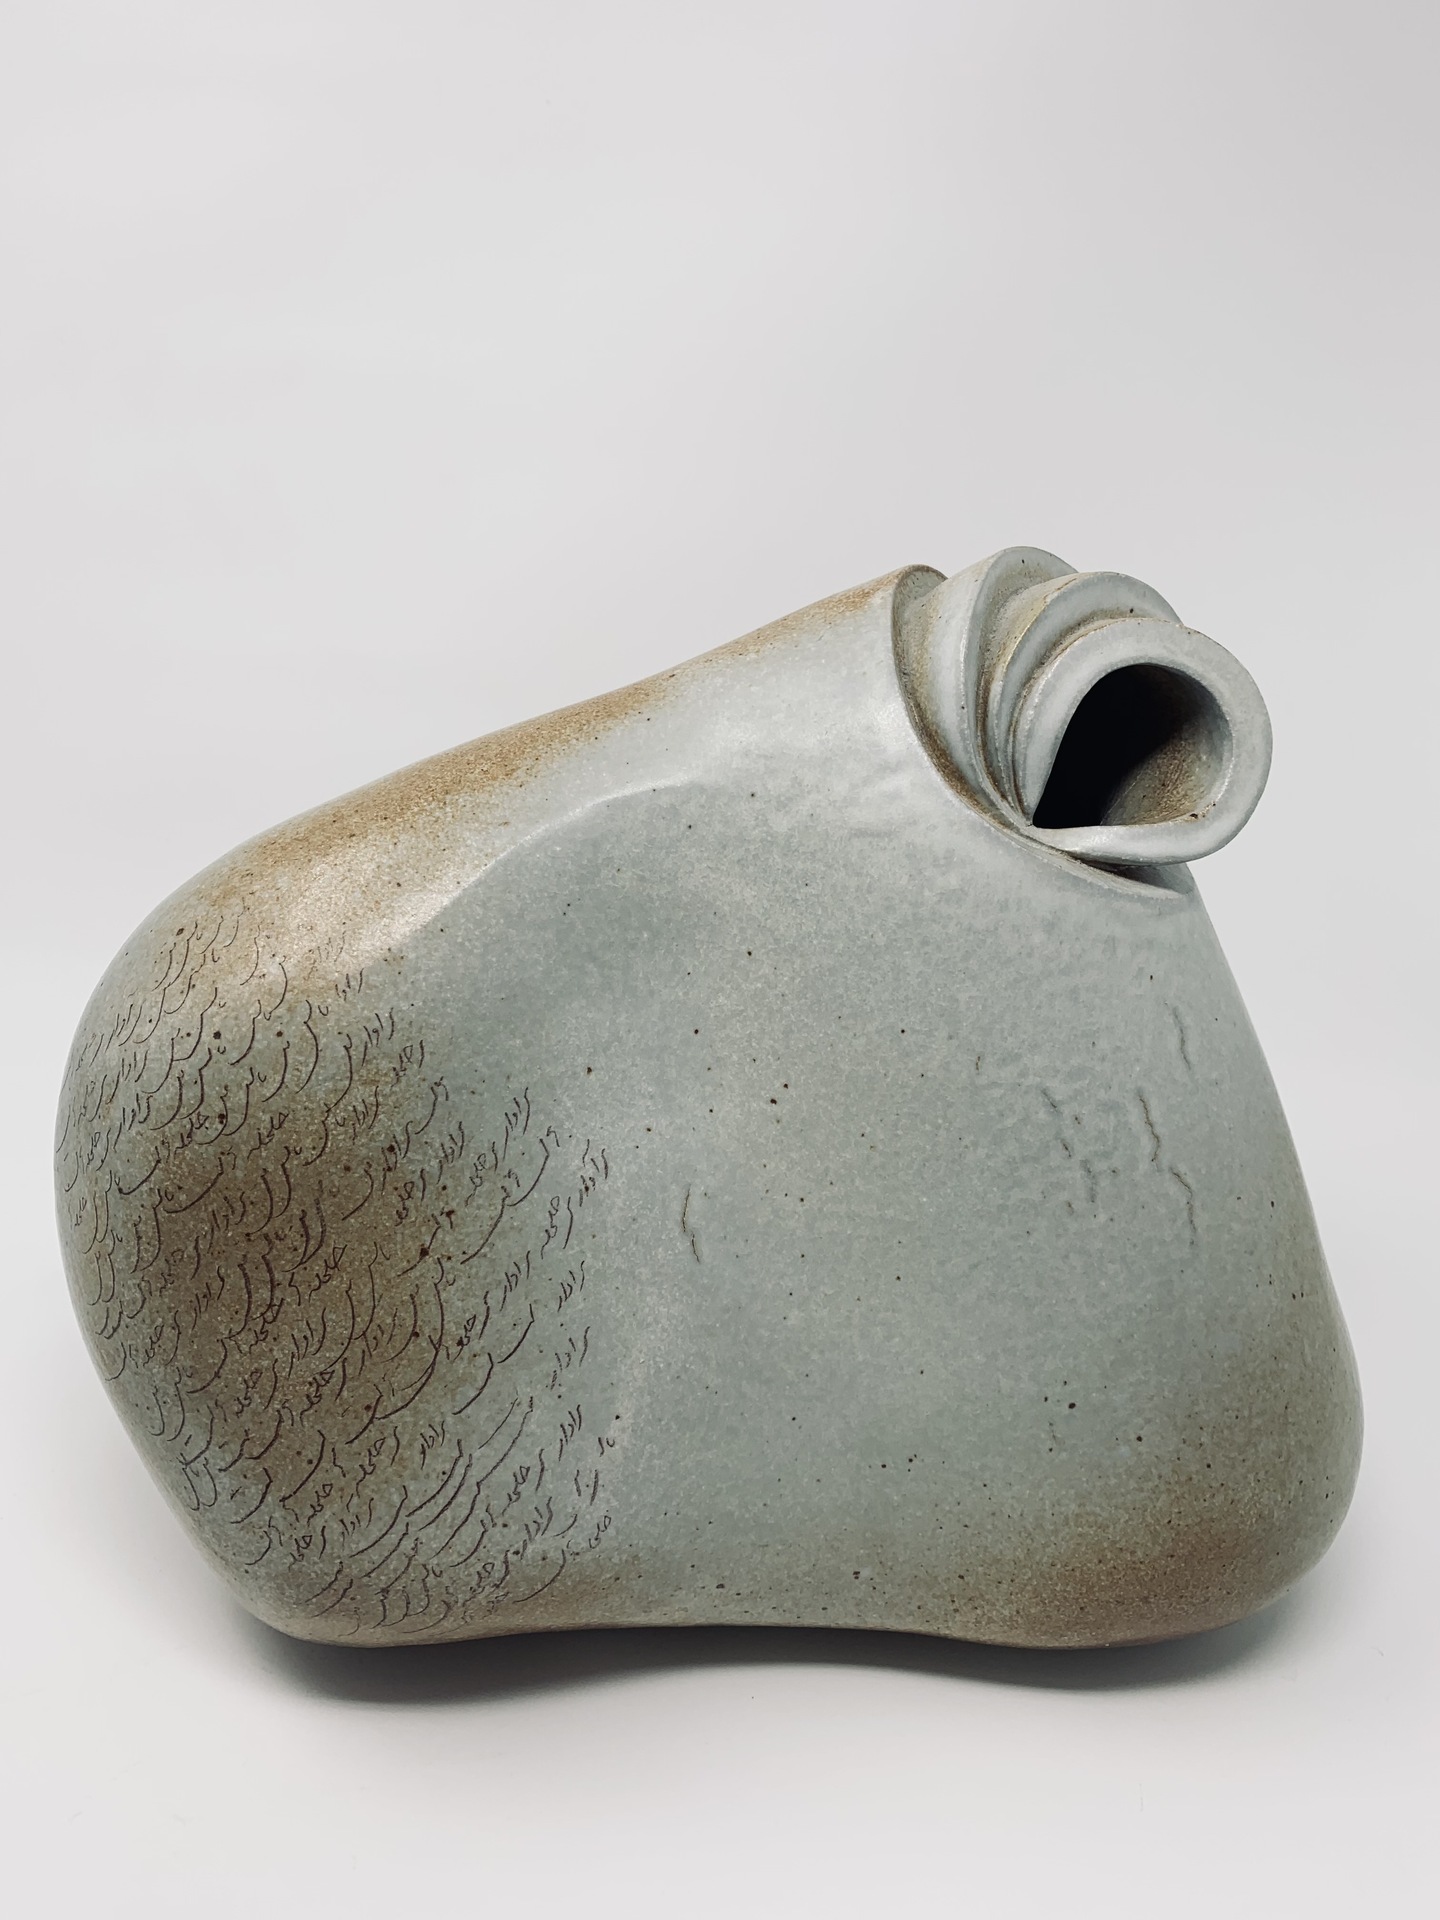 Shahin Massoudi clay vast with small twirl opening on the left side is inscribed with a poem from the artists' Iranian culture.